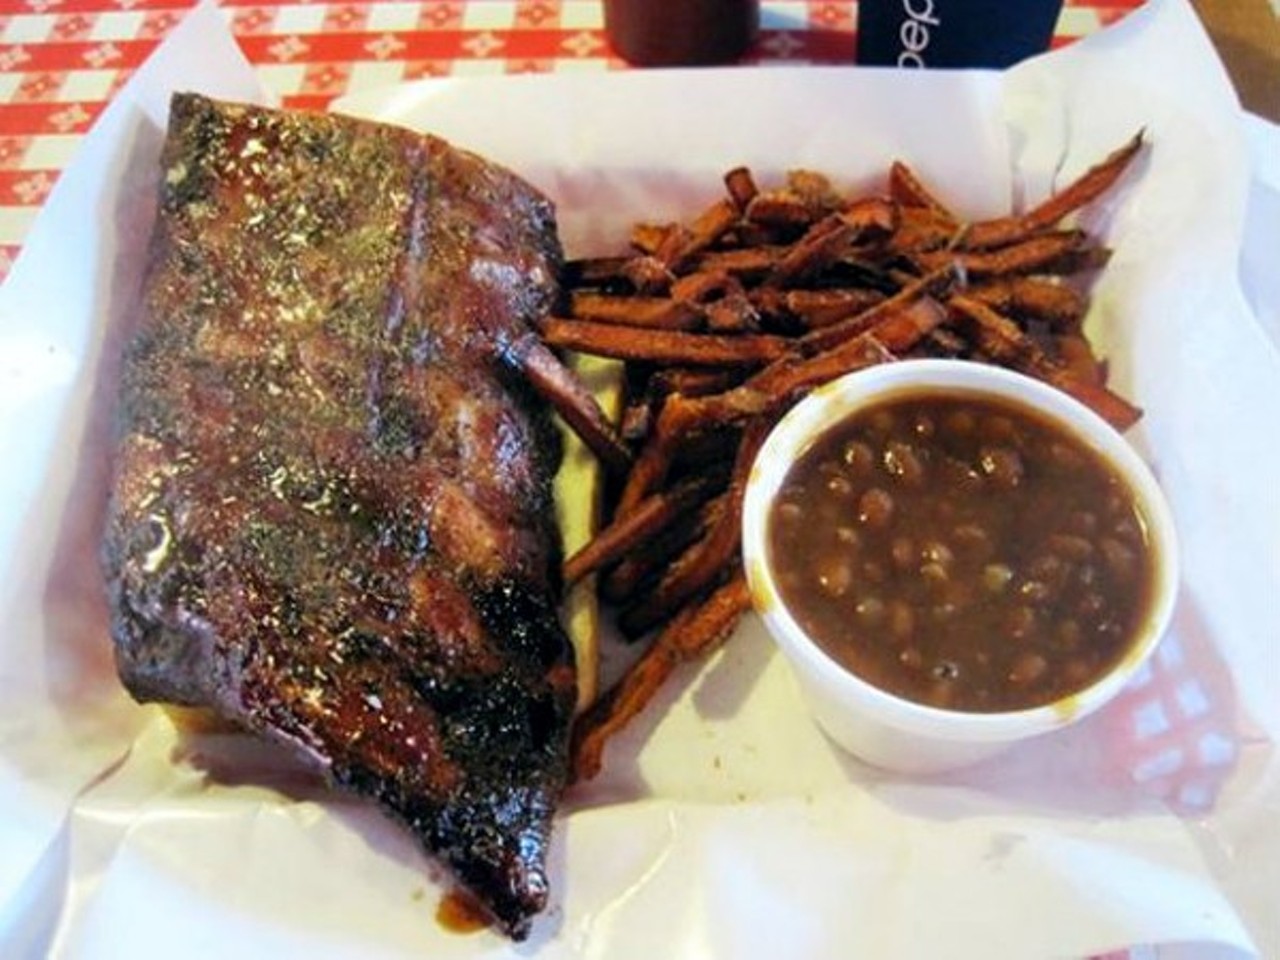 Pappy&#146;s Smokehouse
(Two locations, including 3106 Olive Street, 314-535-4340)
&#147;This is what food should be.&#148; - Amit K.
Photo credit: Ian Froeb